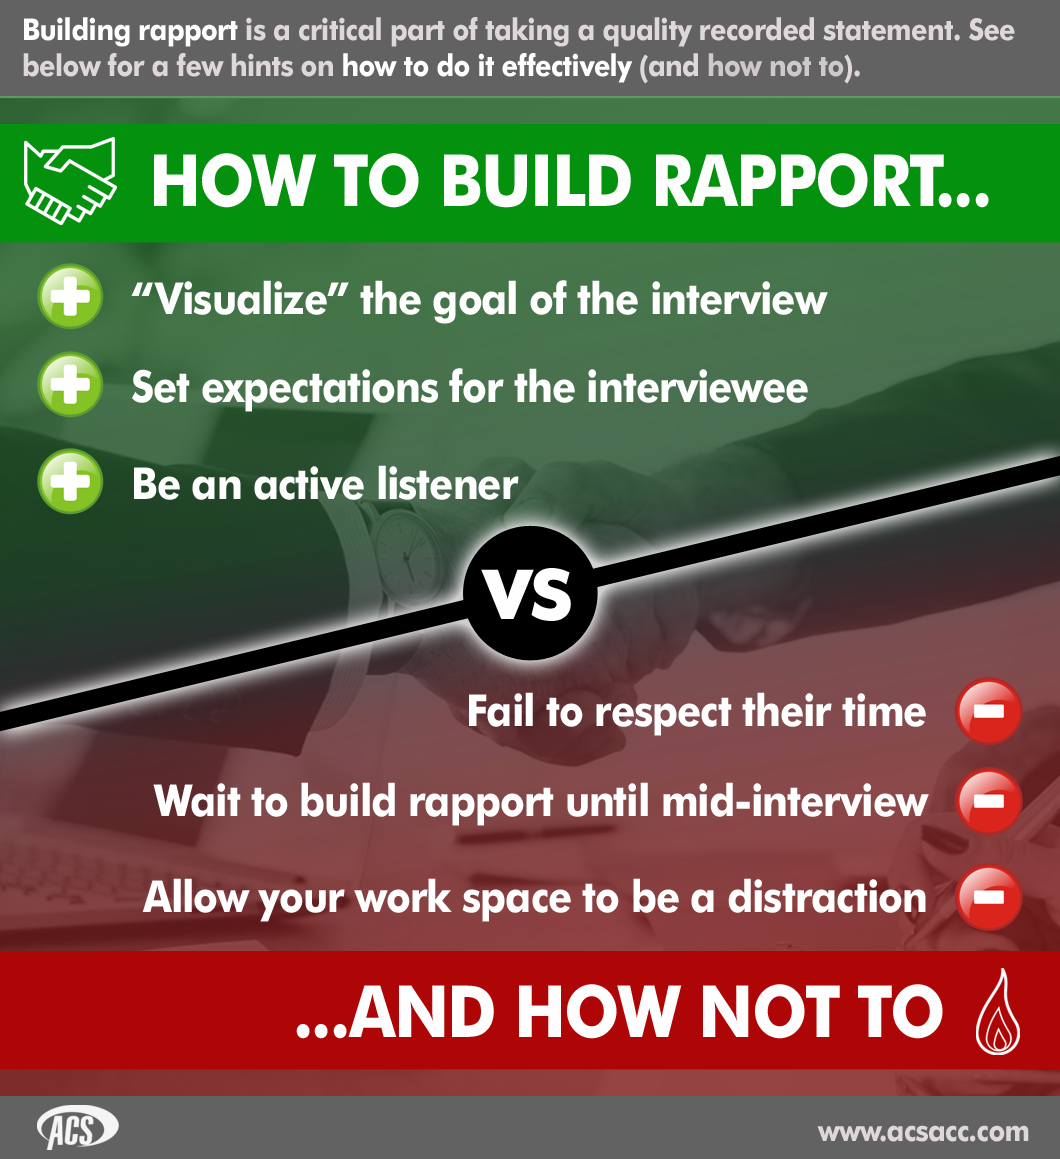 How to build rapport